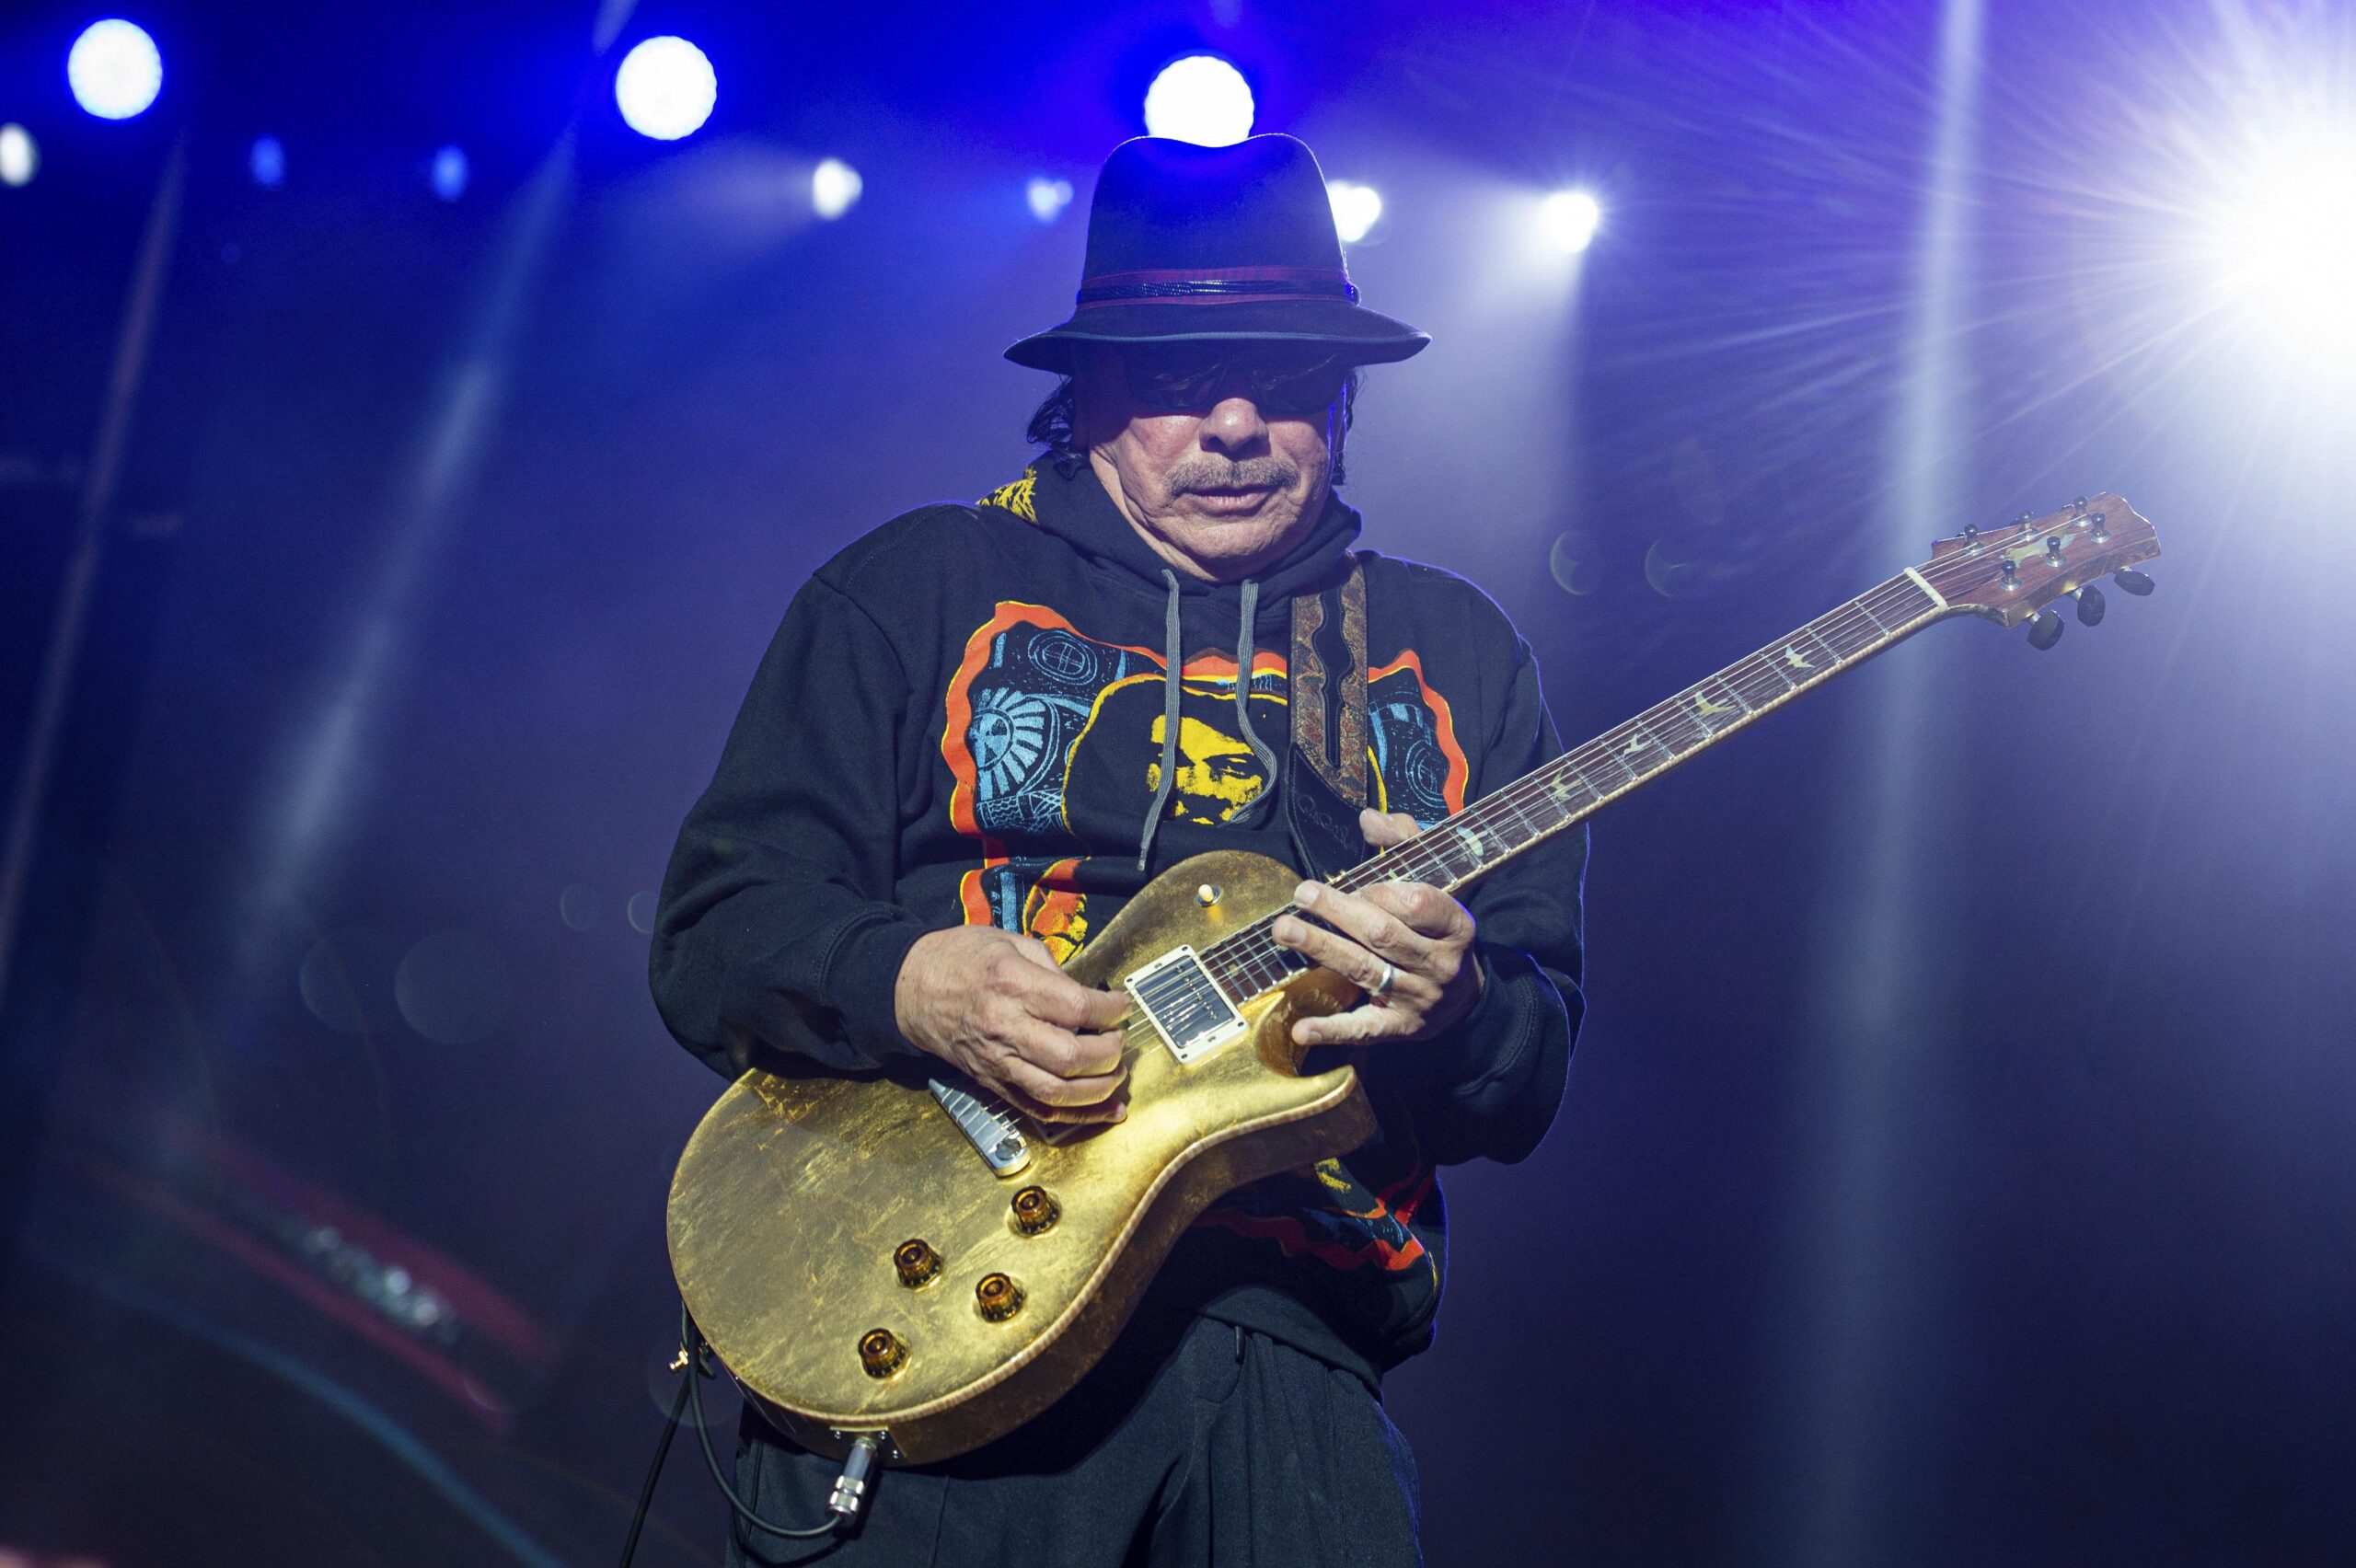 Carlos Santana collapses during Michigan concert due to heat exhaustion, dehydration